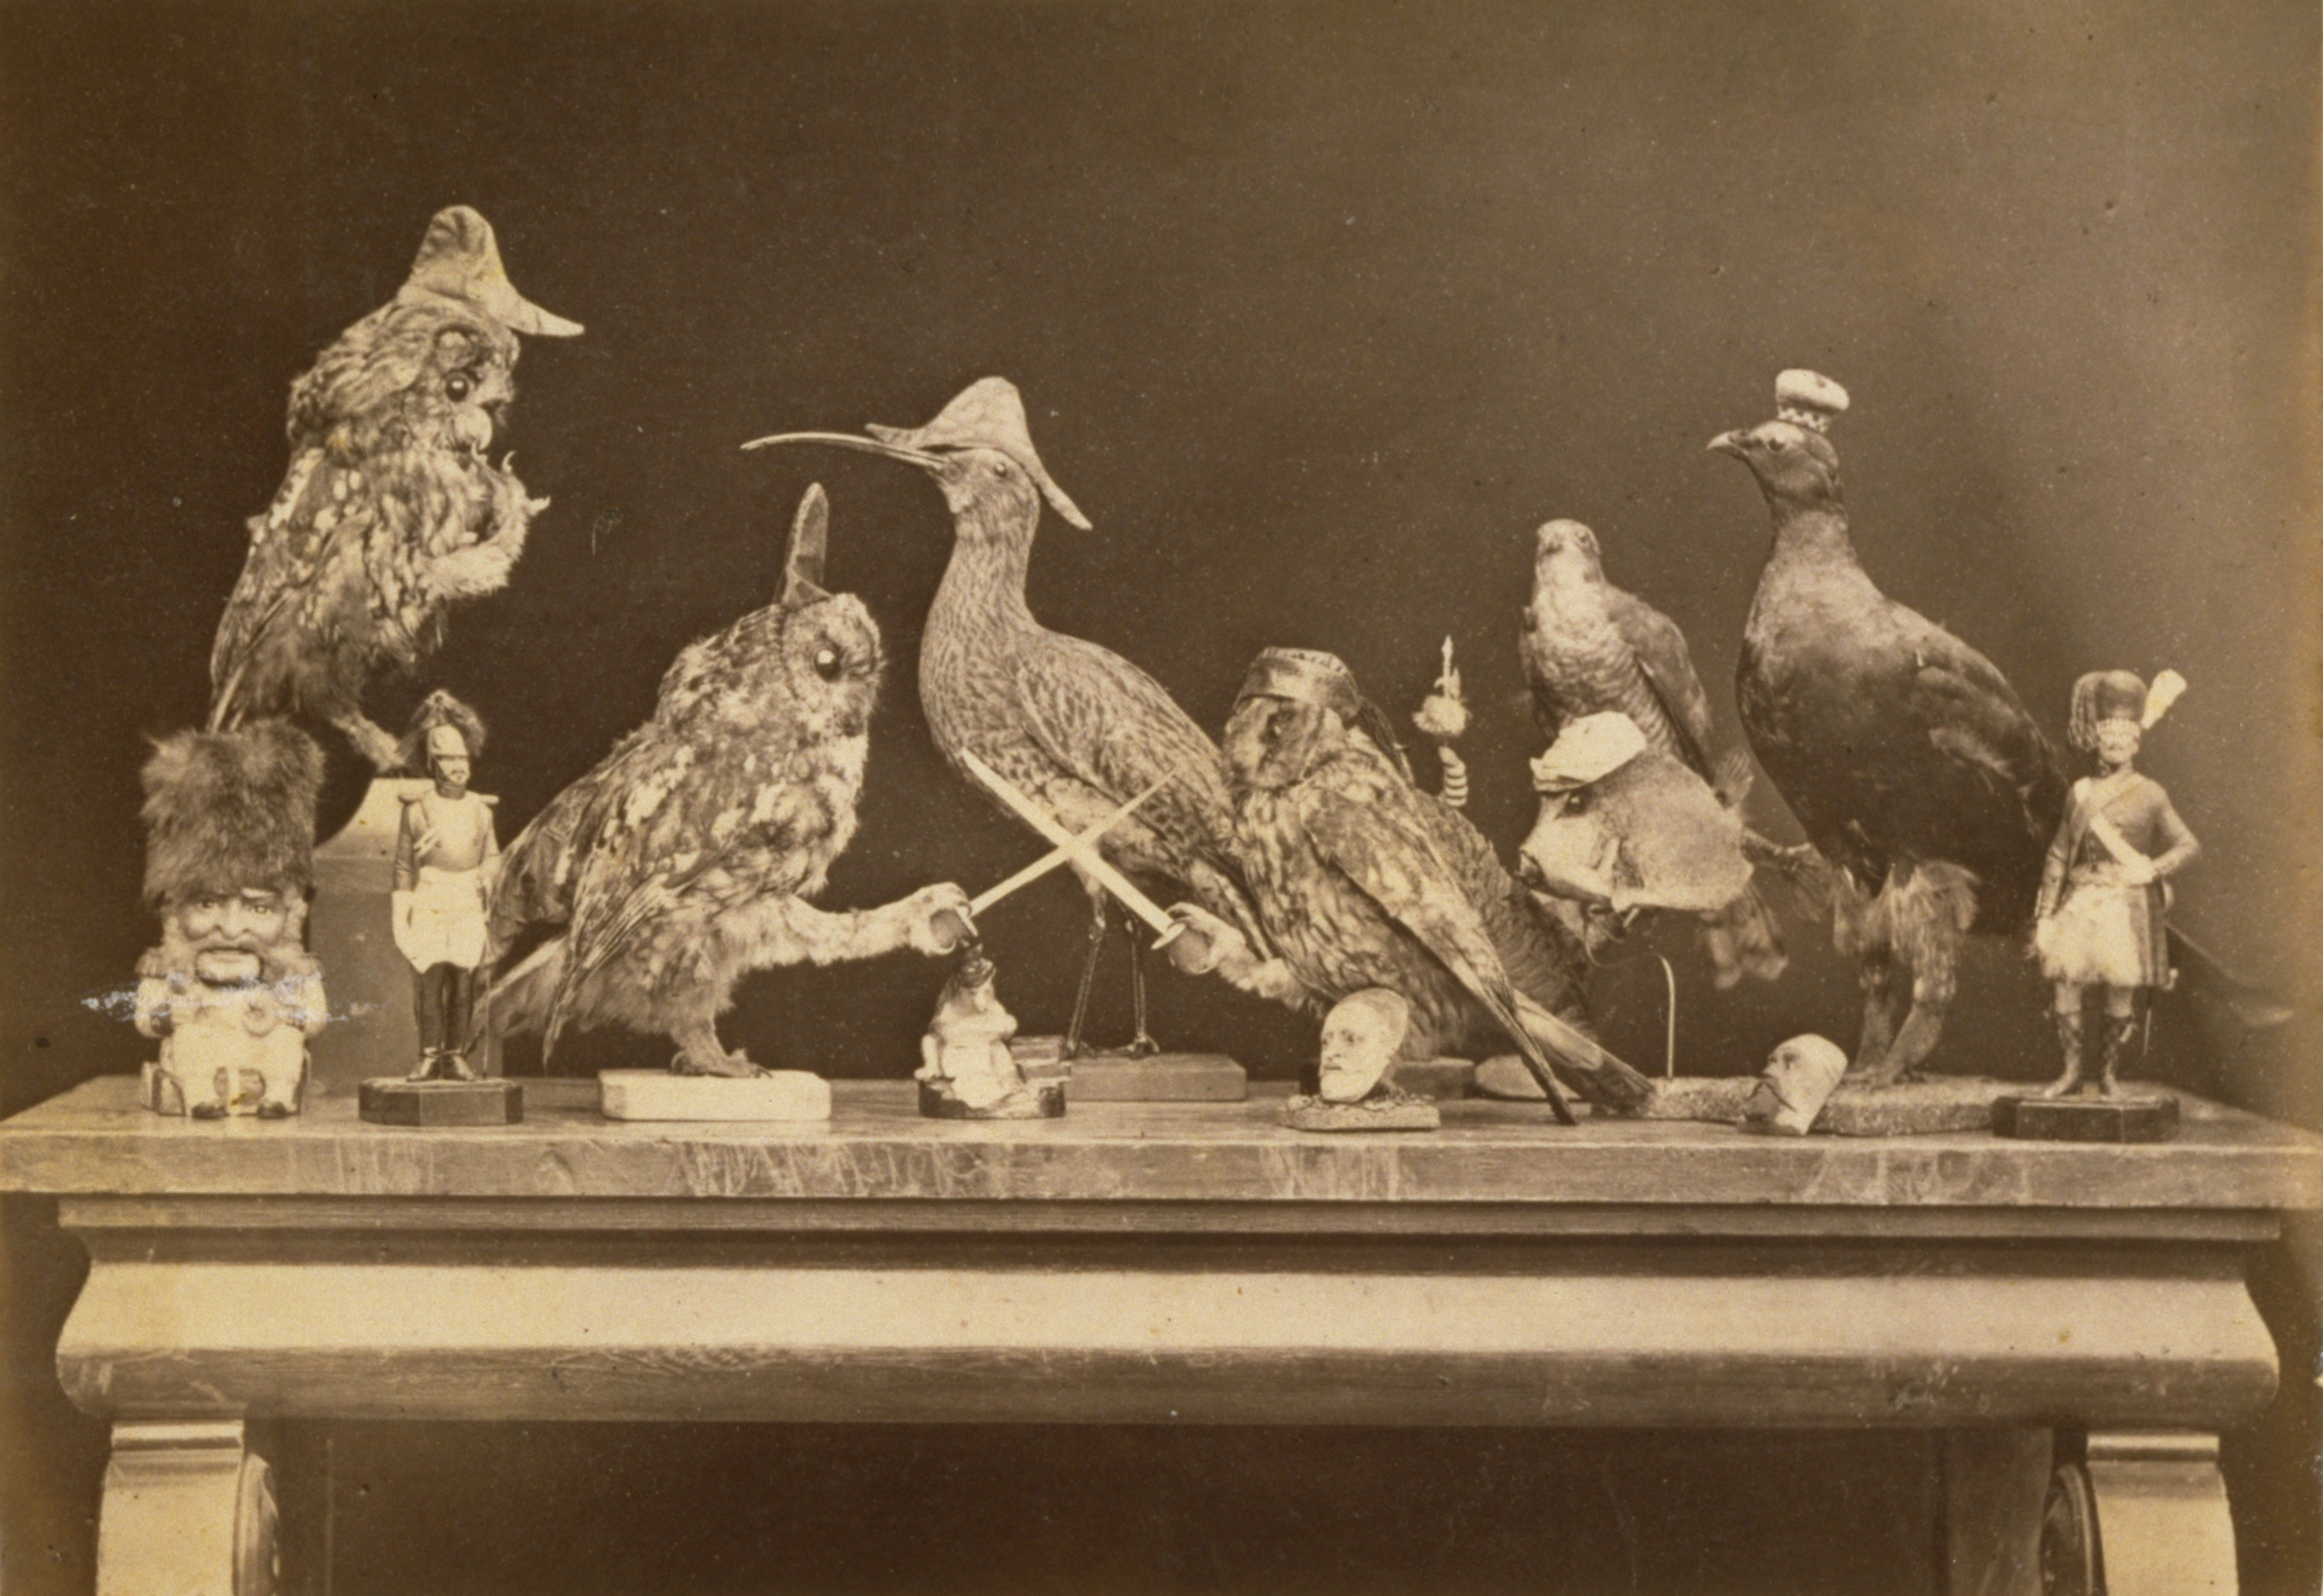 “Mock battle tableau” between stuffed birds and fish, military figurines, toby jug and human head plaques by Dr John Adamson, 1860.  (St Andrews ALB-49-45-2)